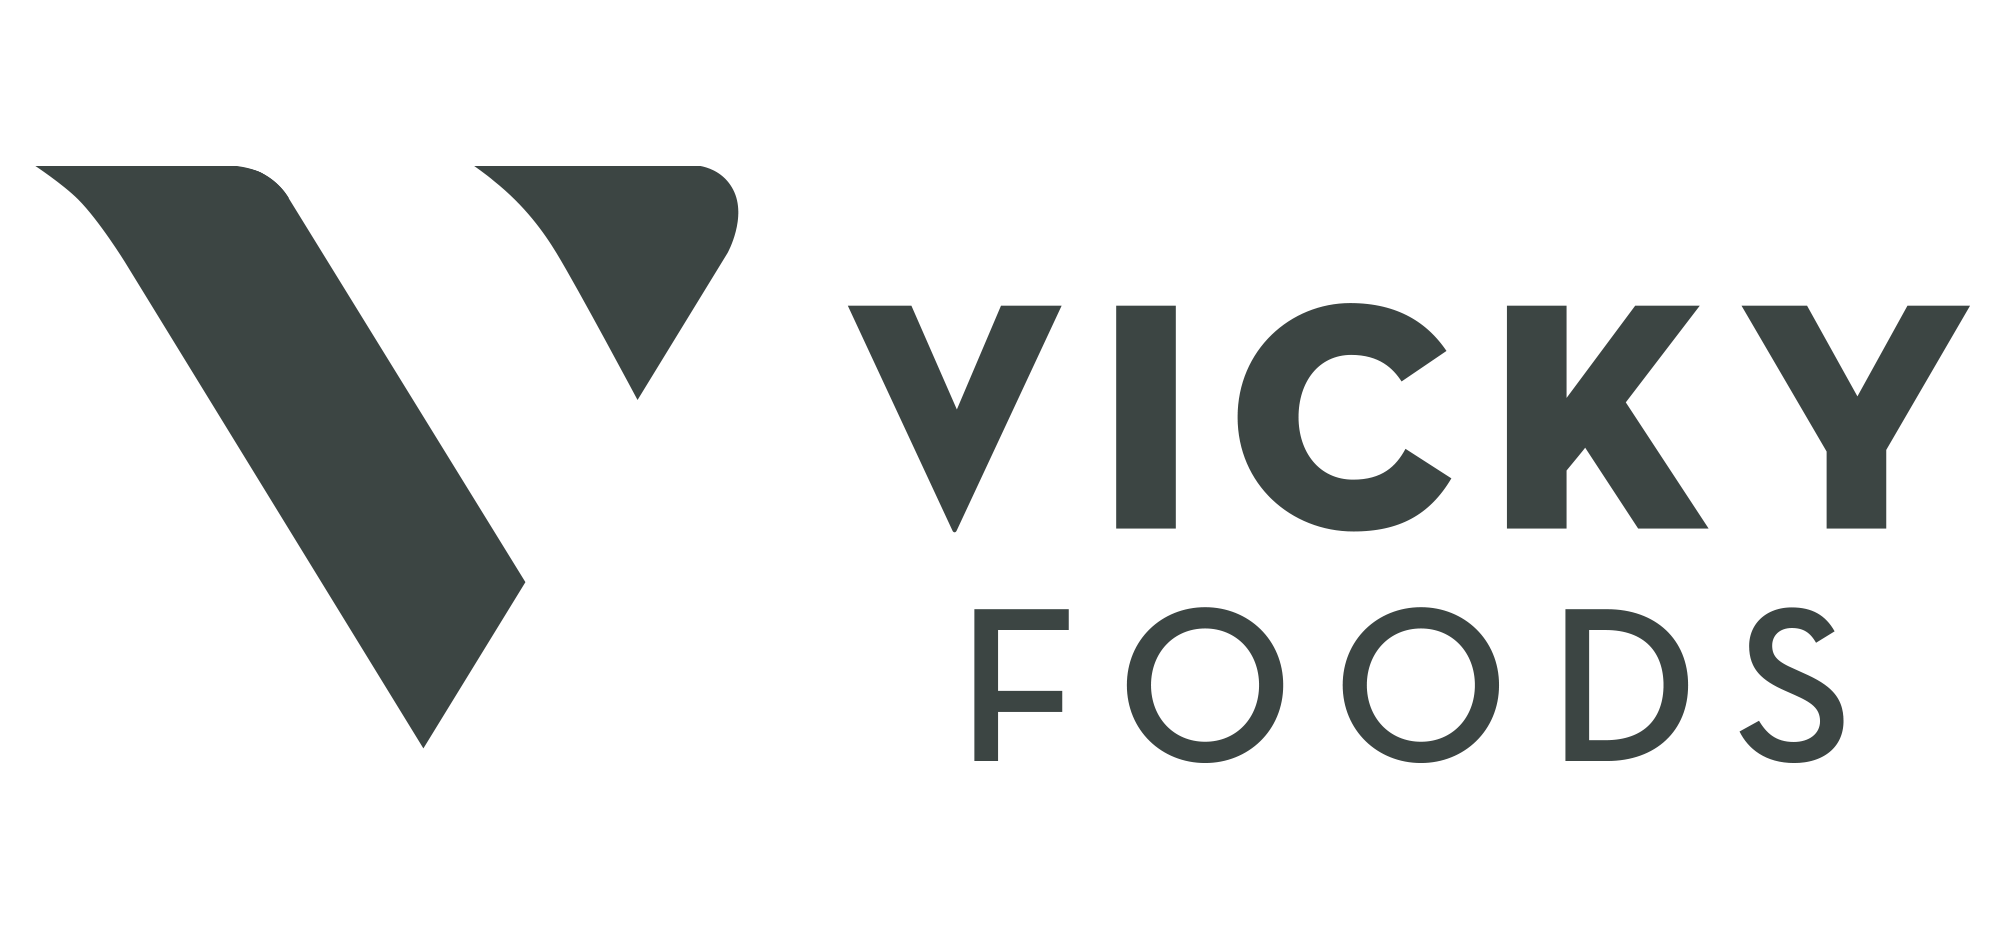 Vicky Foods Products S.L.U